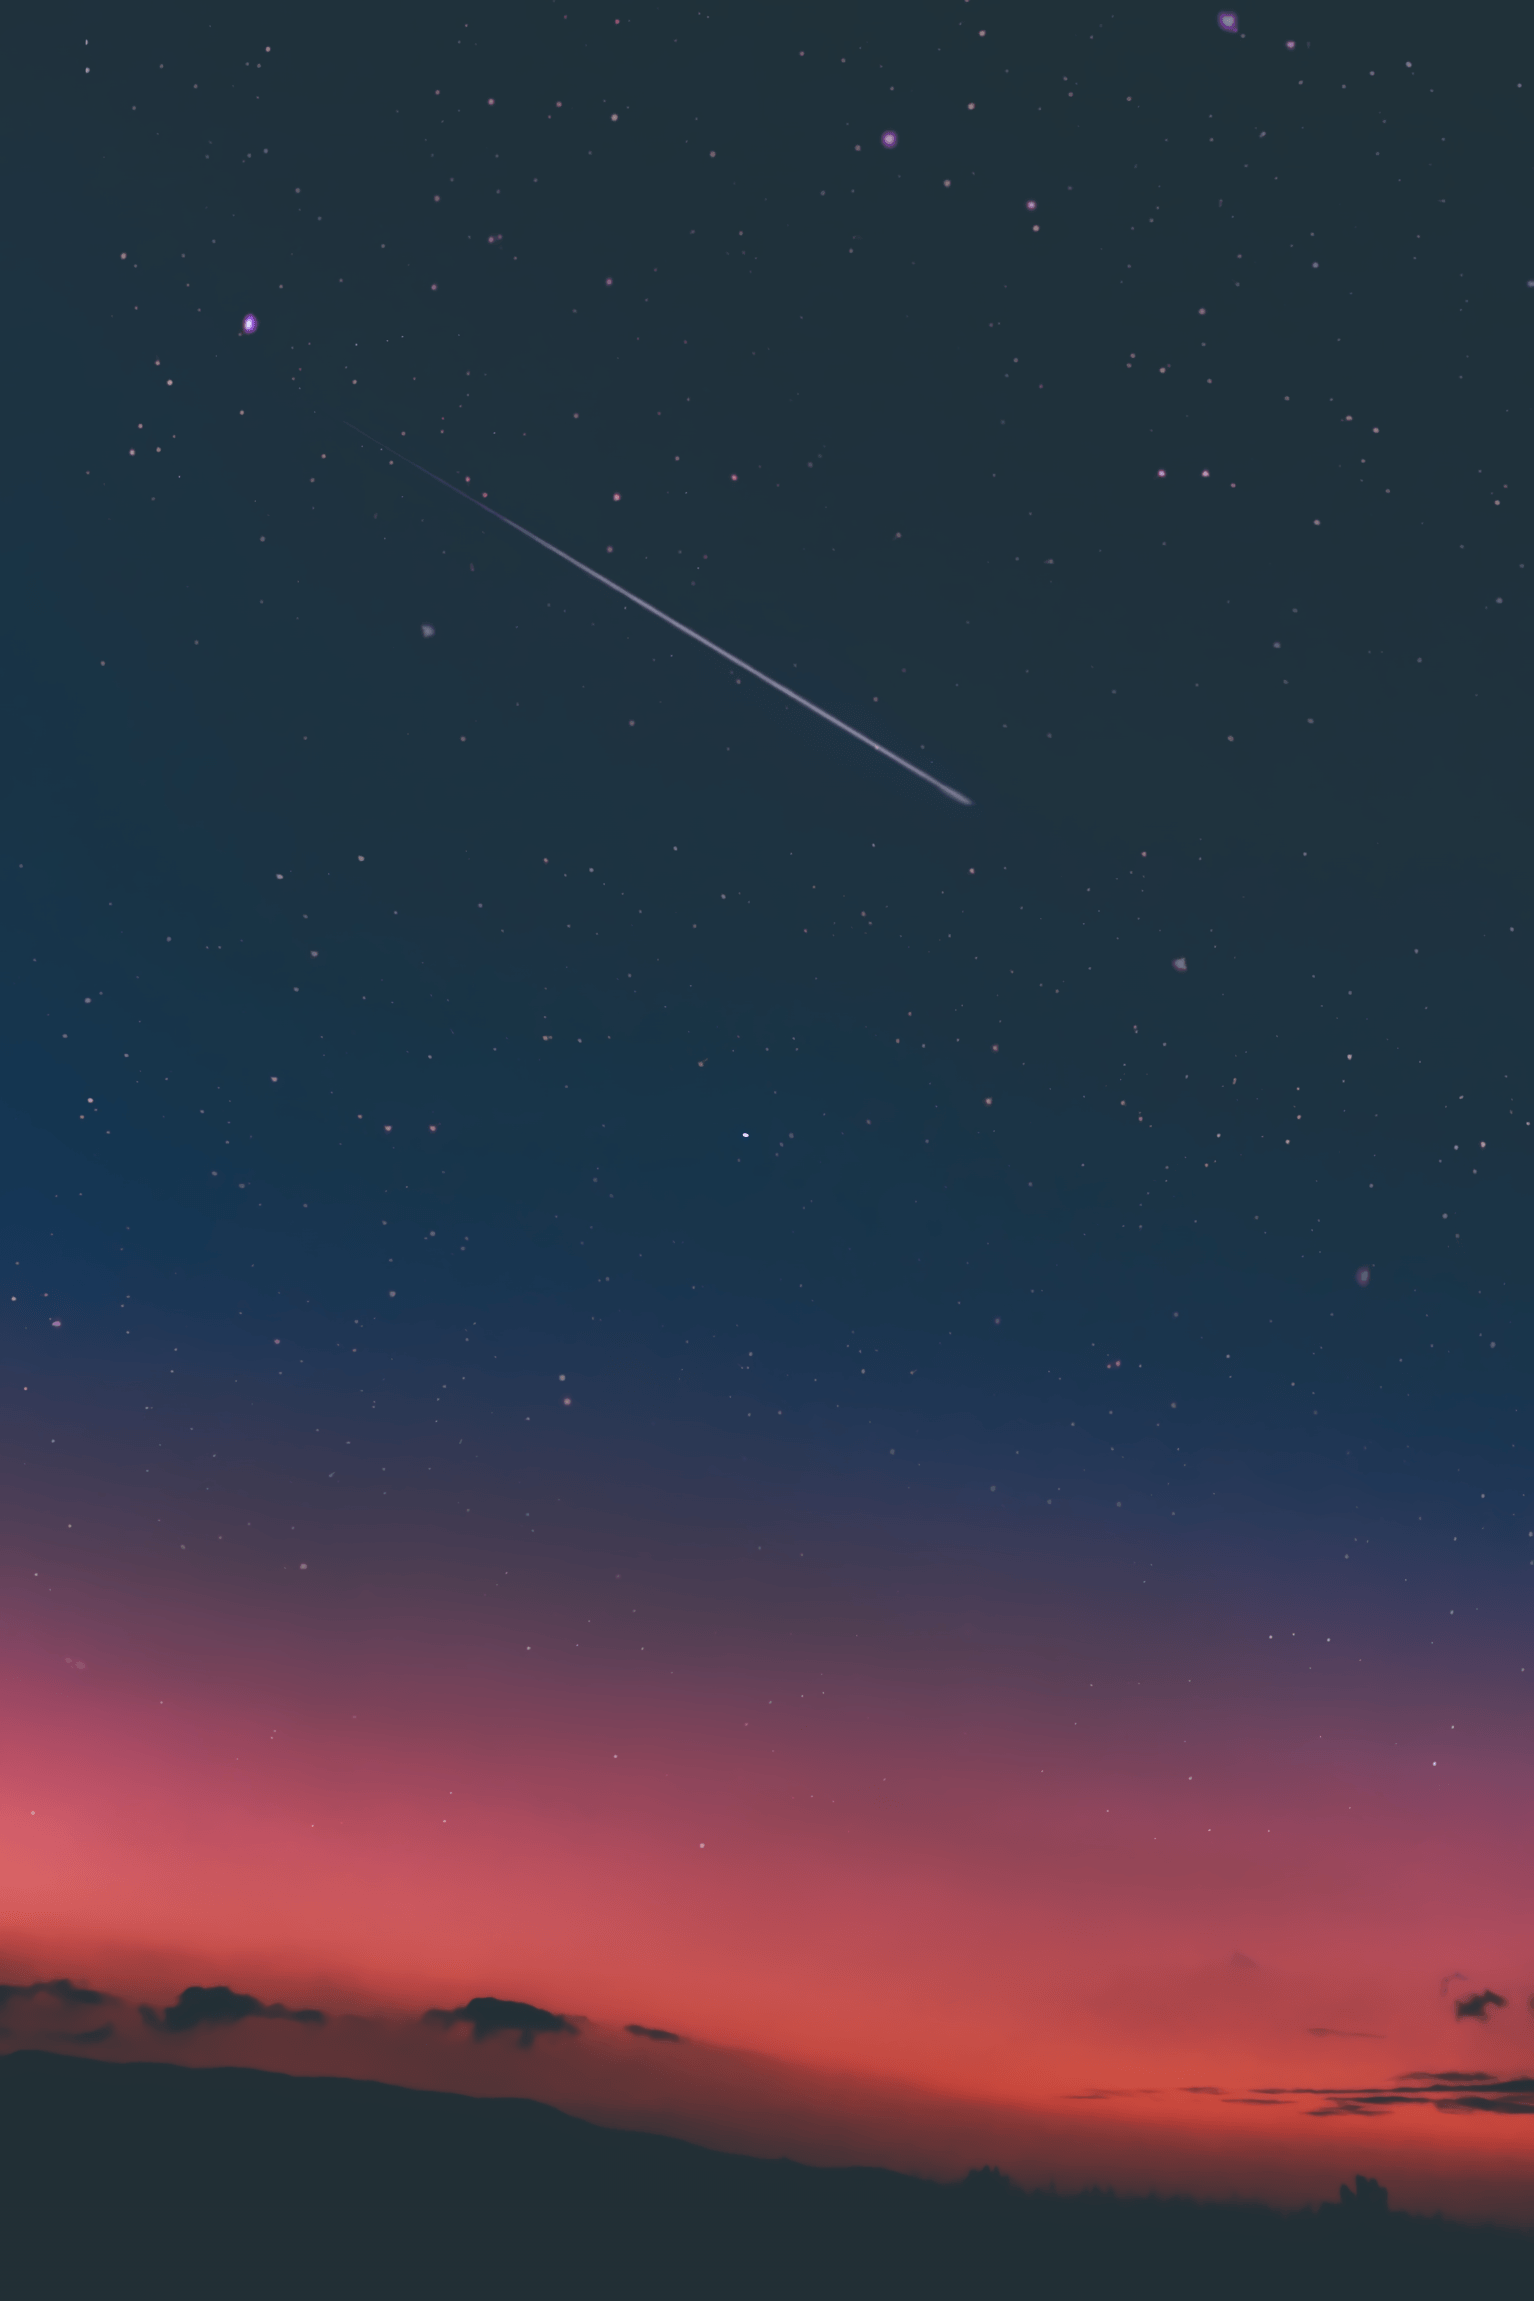 This wallpaper looks nice with the simpler One UI icons